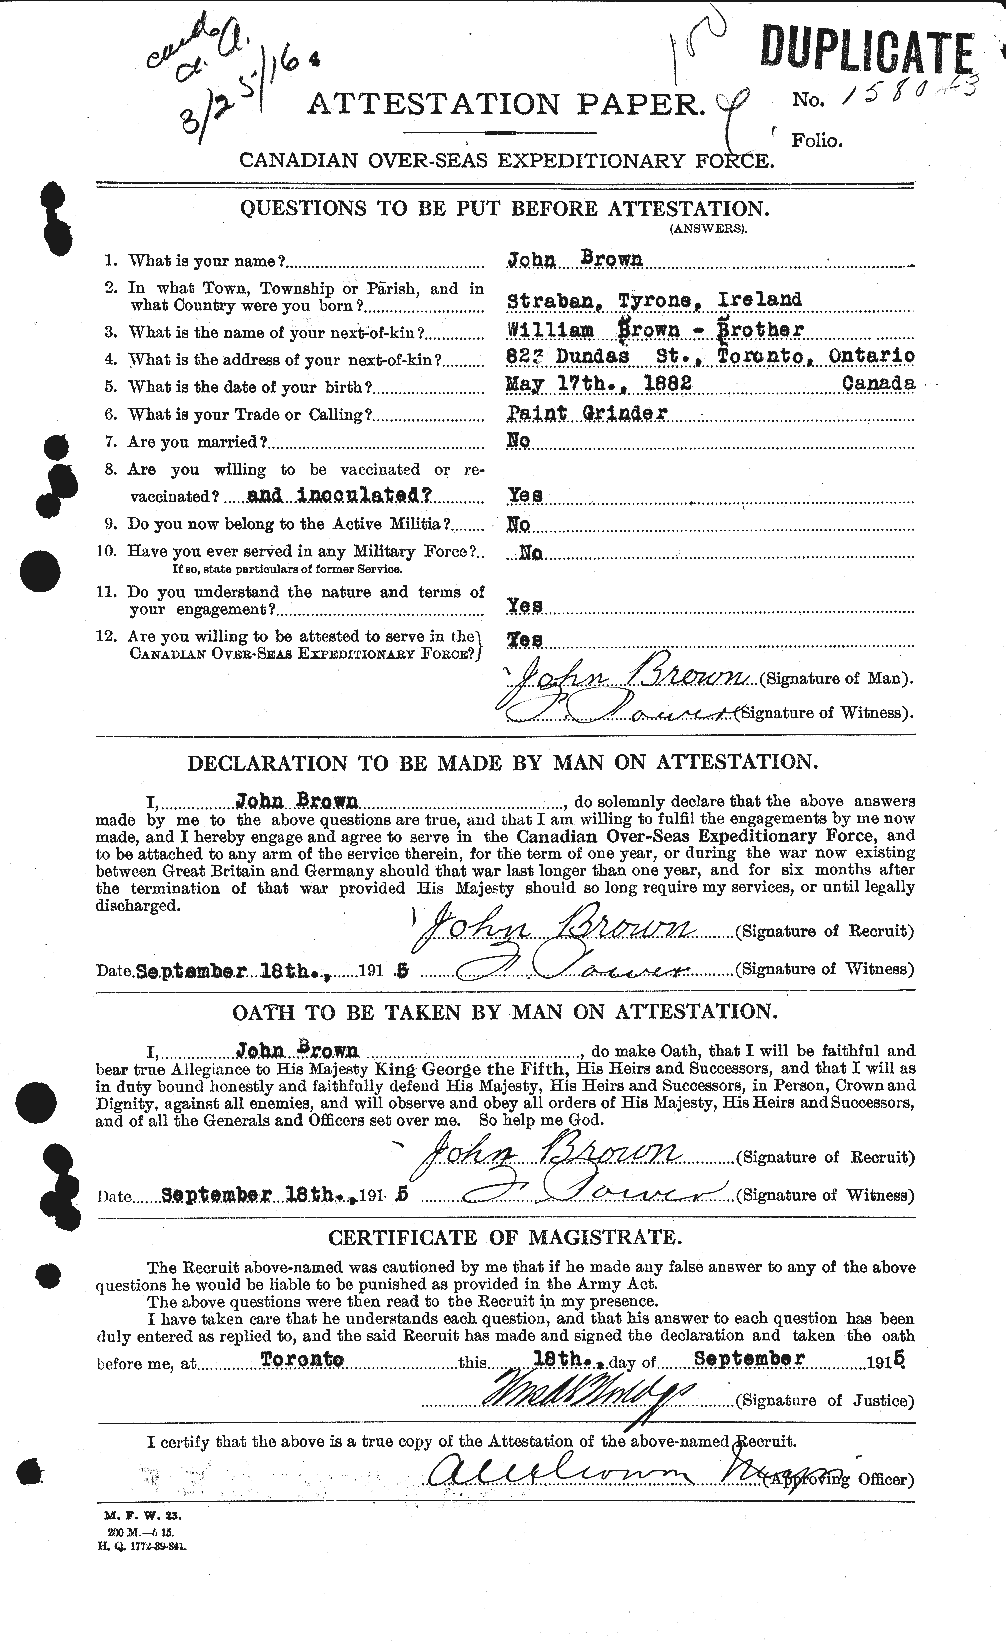 Personnel Records of the First World War - CEF 263901a